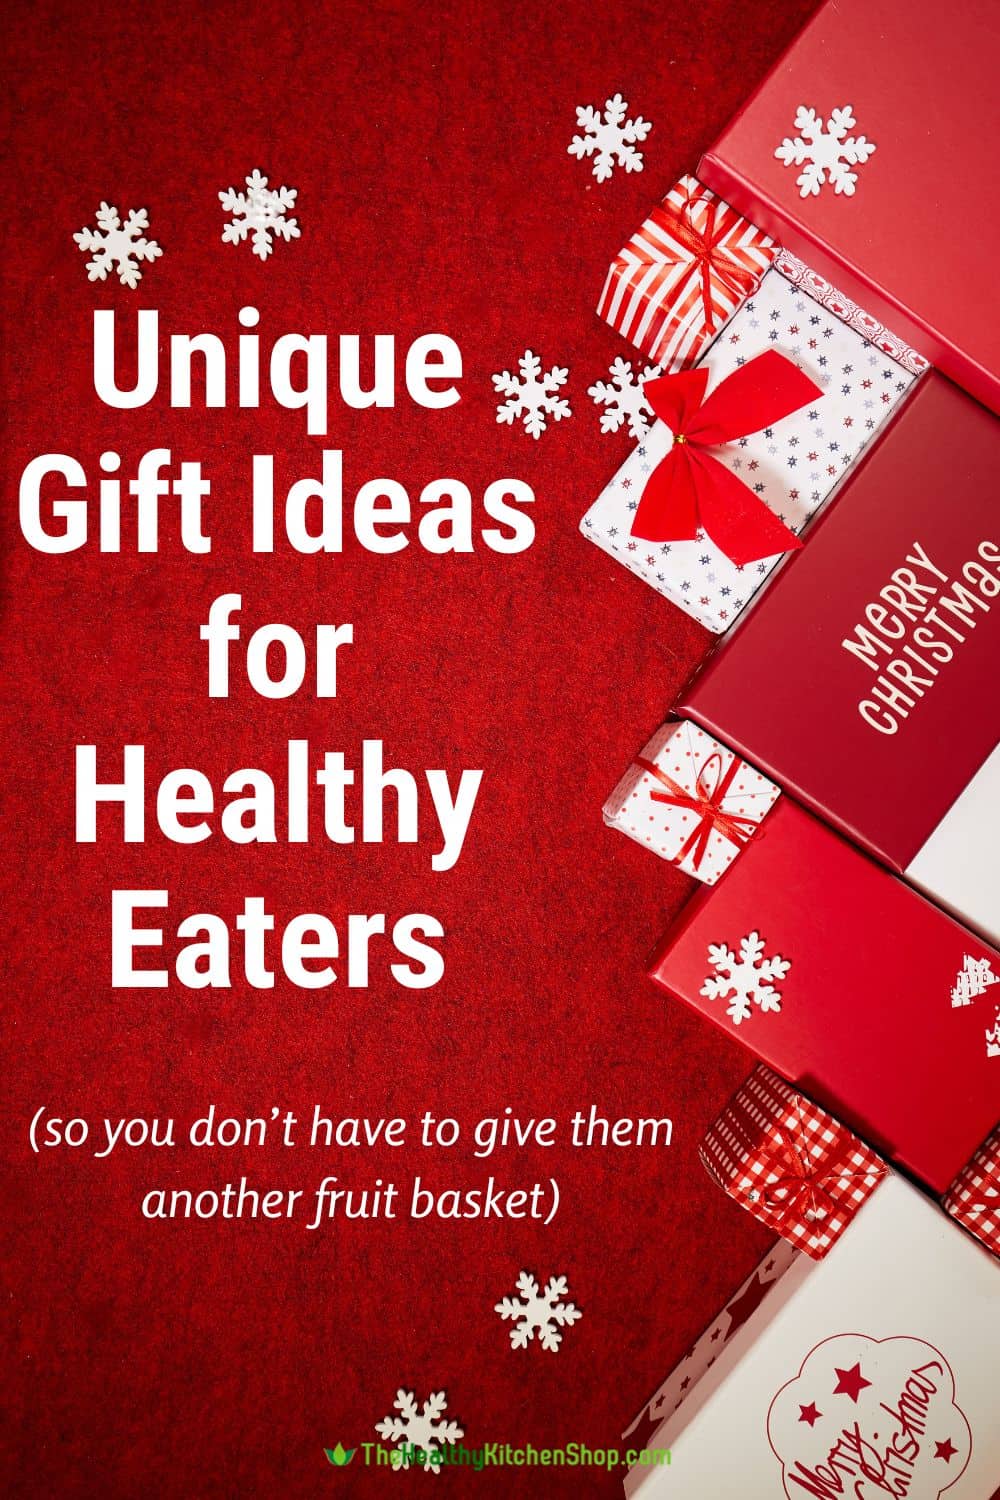 Gift Ideas for Healthy Eaters